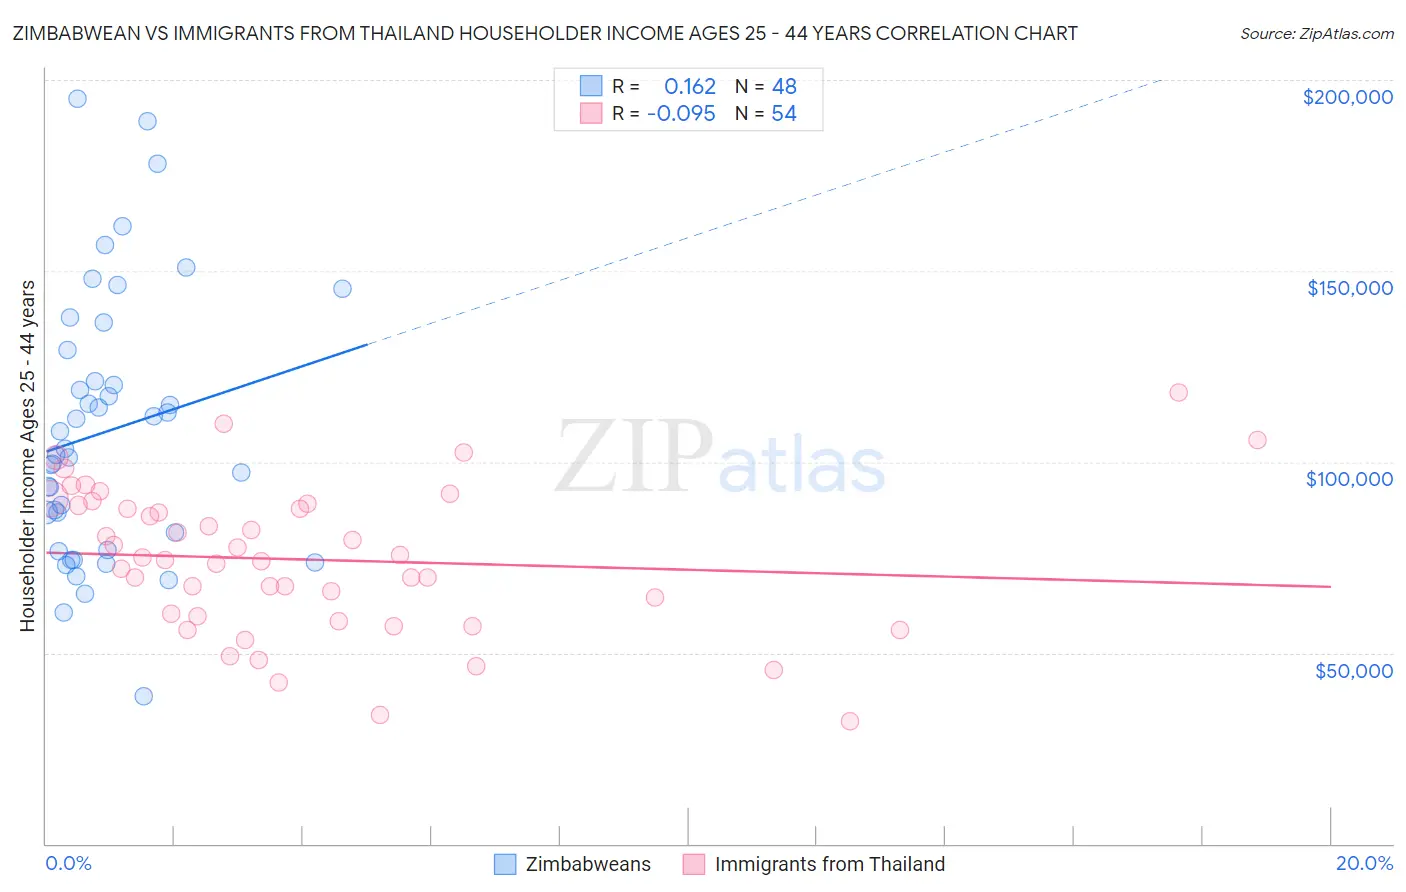 Zimbabwean vs Immigrants from Thailand Householder Income Ages 25 - 44 years